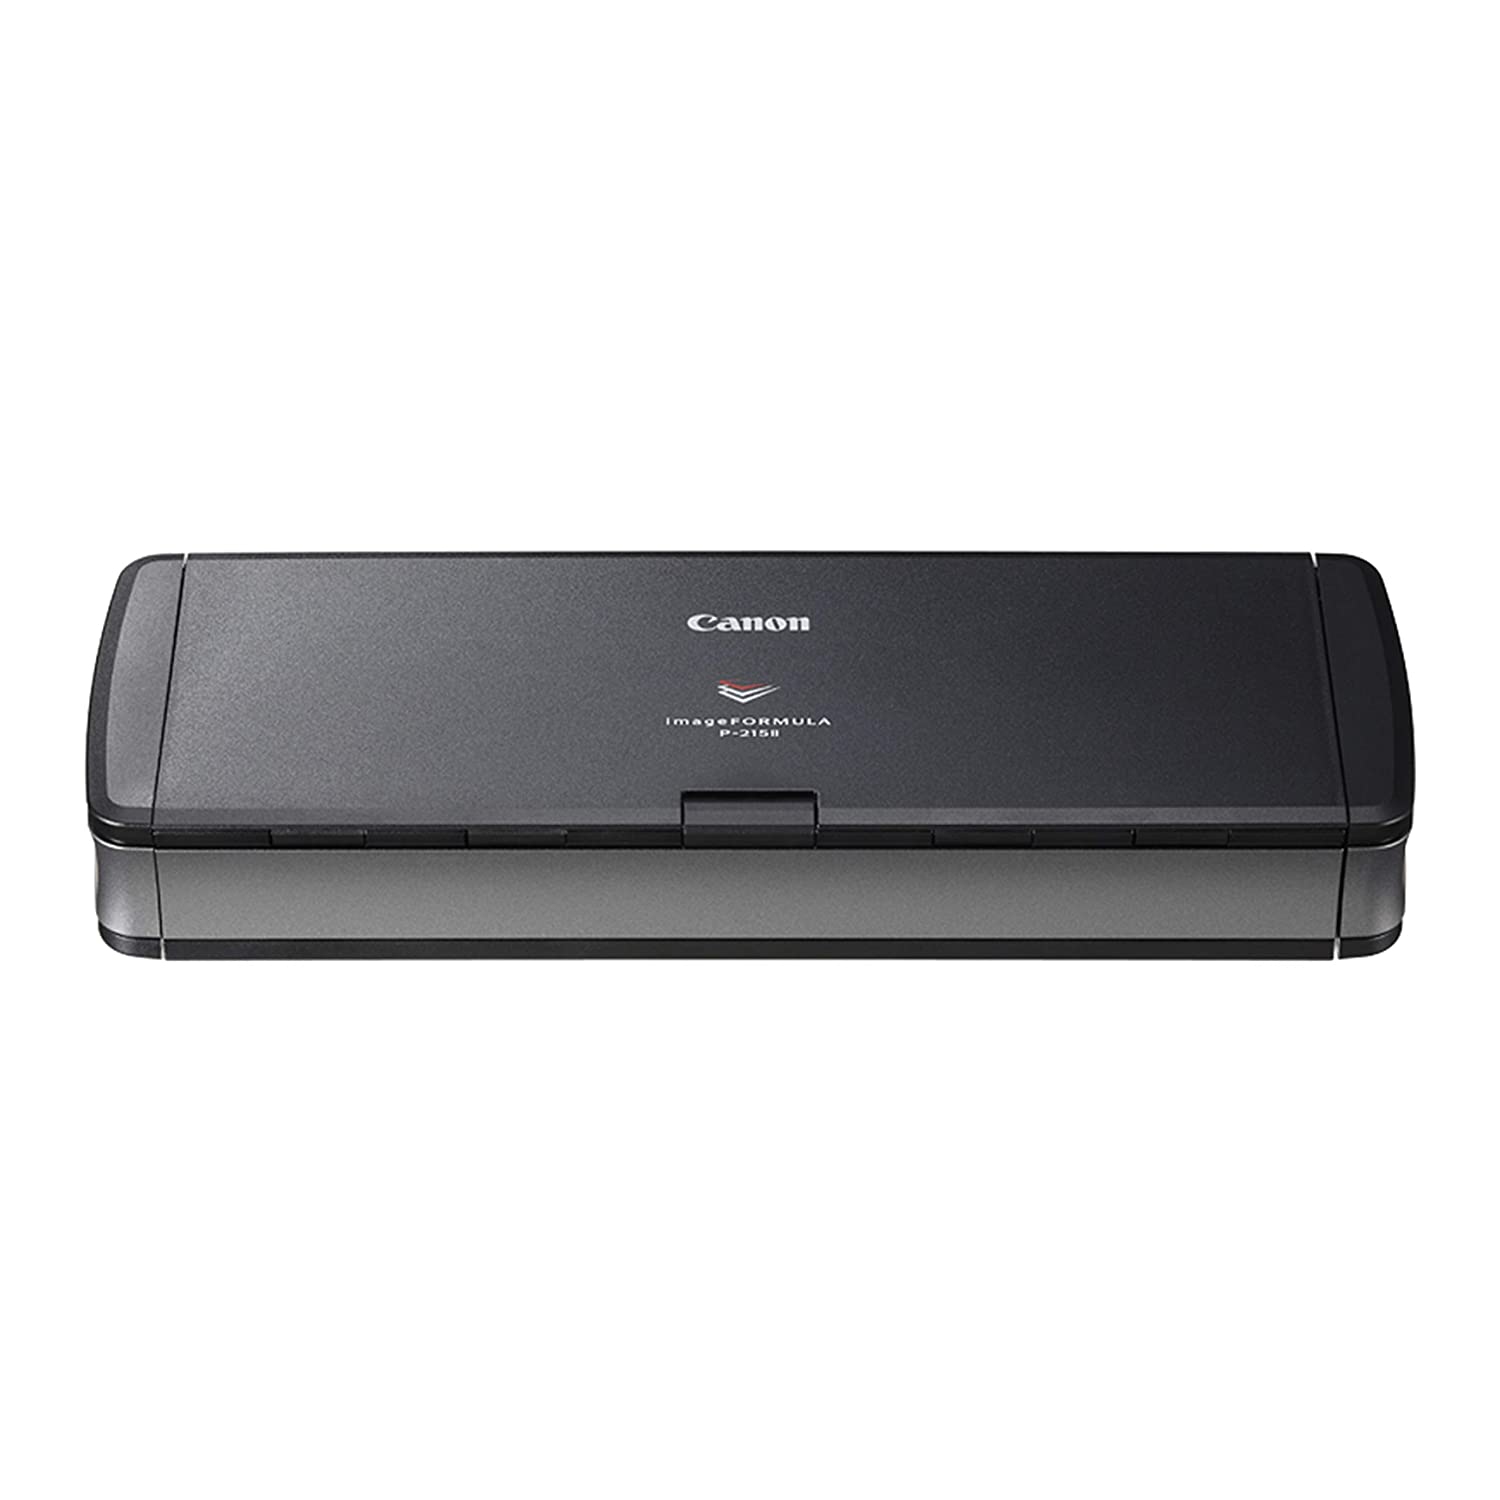 Hand Help Scanners Roundup – Canon imageFORMULA P-215 Scan-tini Personal Document Scanner